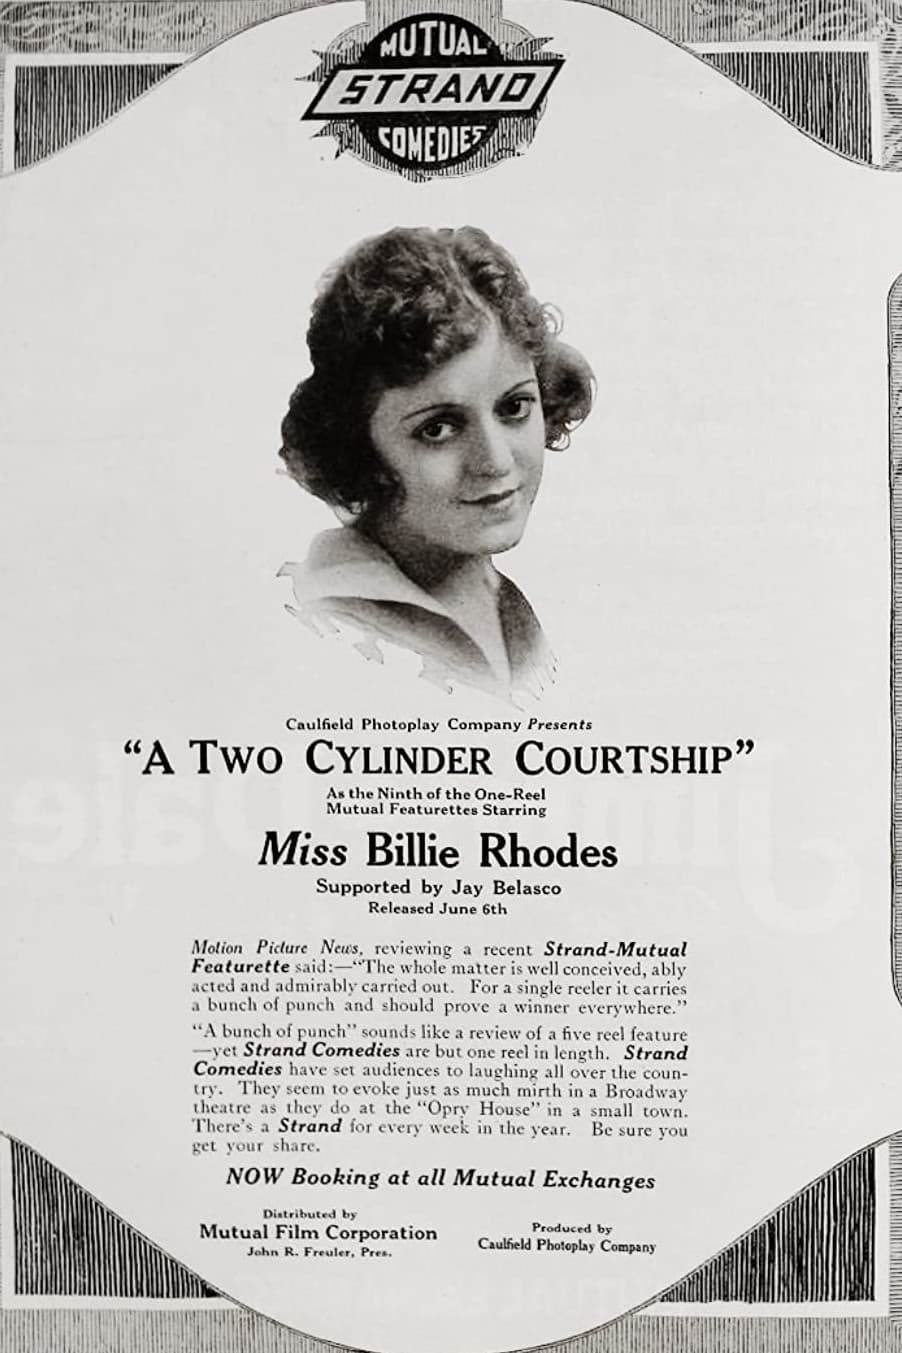 A Two Cylinder Courtship